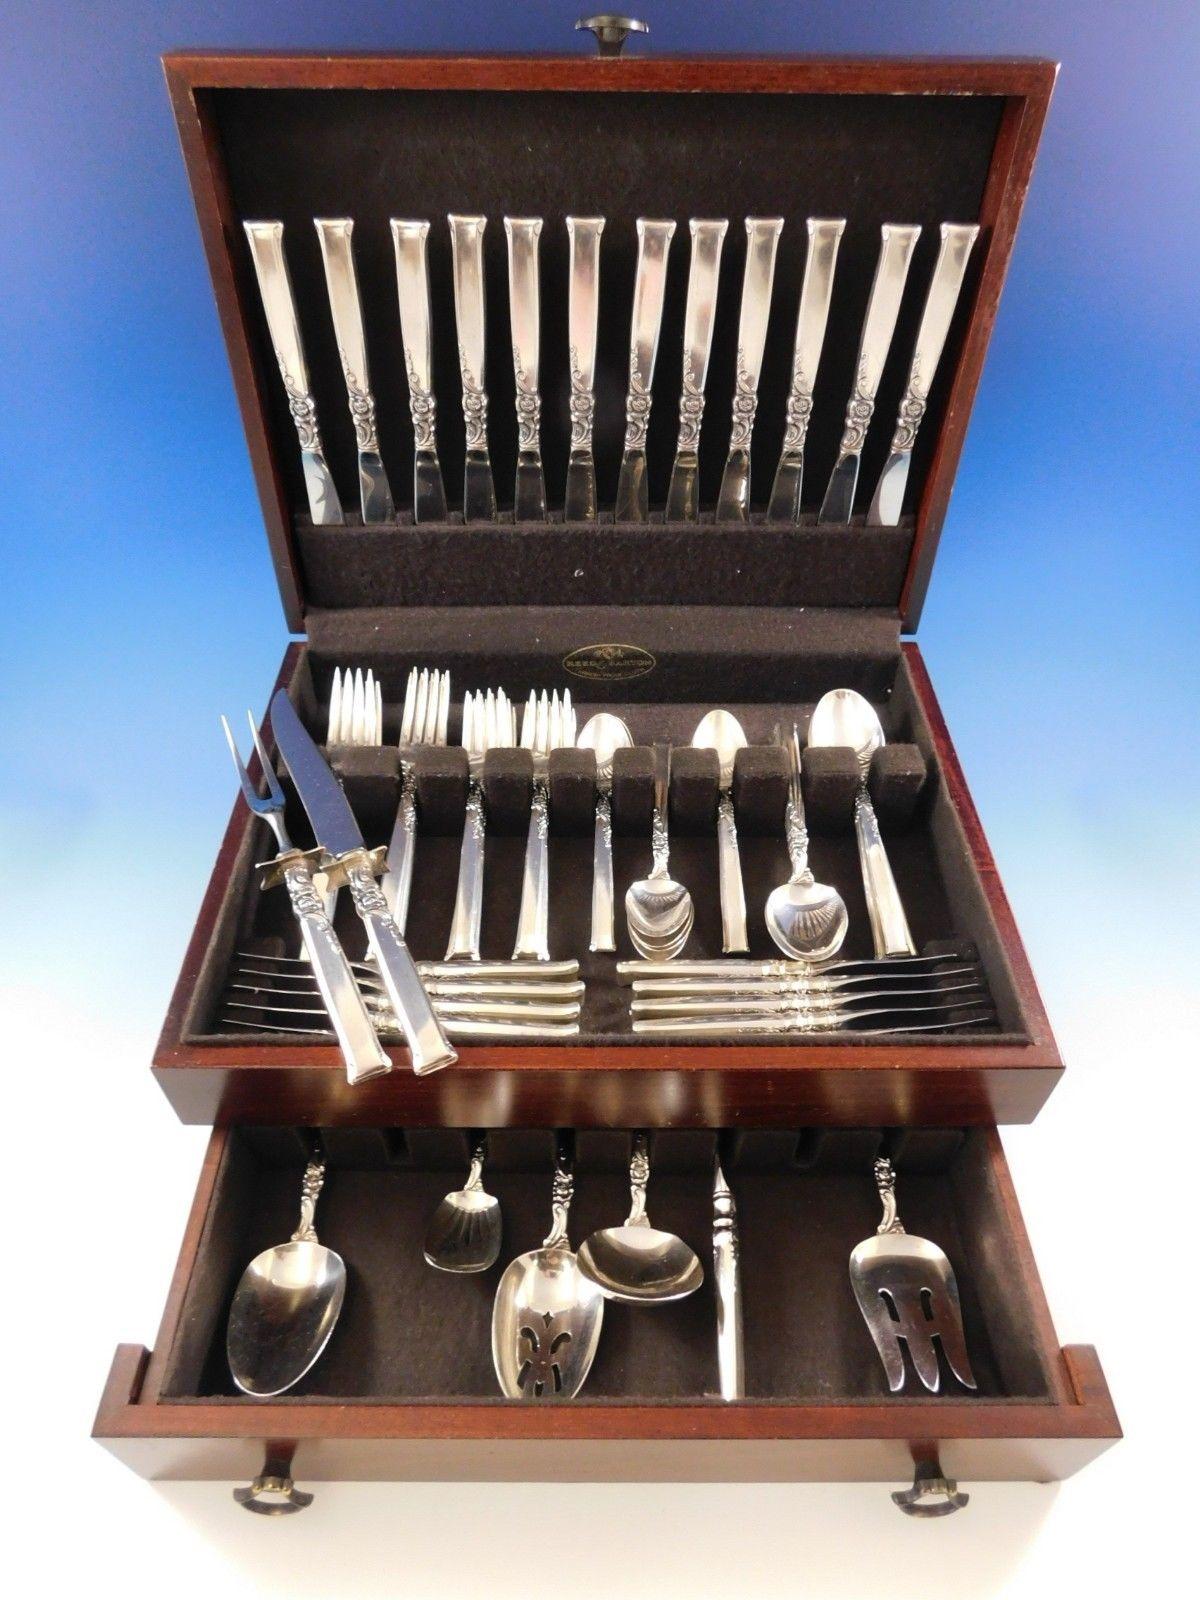 Lovely Silver Rose by Oneida sterling silver flatware set of 80 pieces. This set includes:

12 knives, 8 5/8